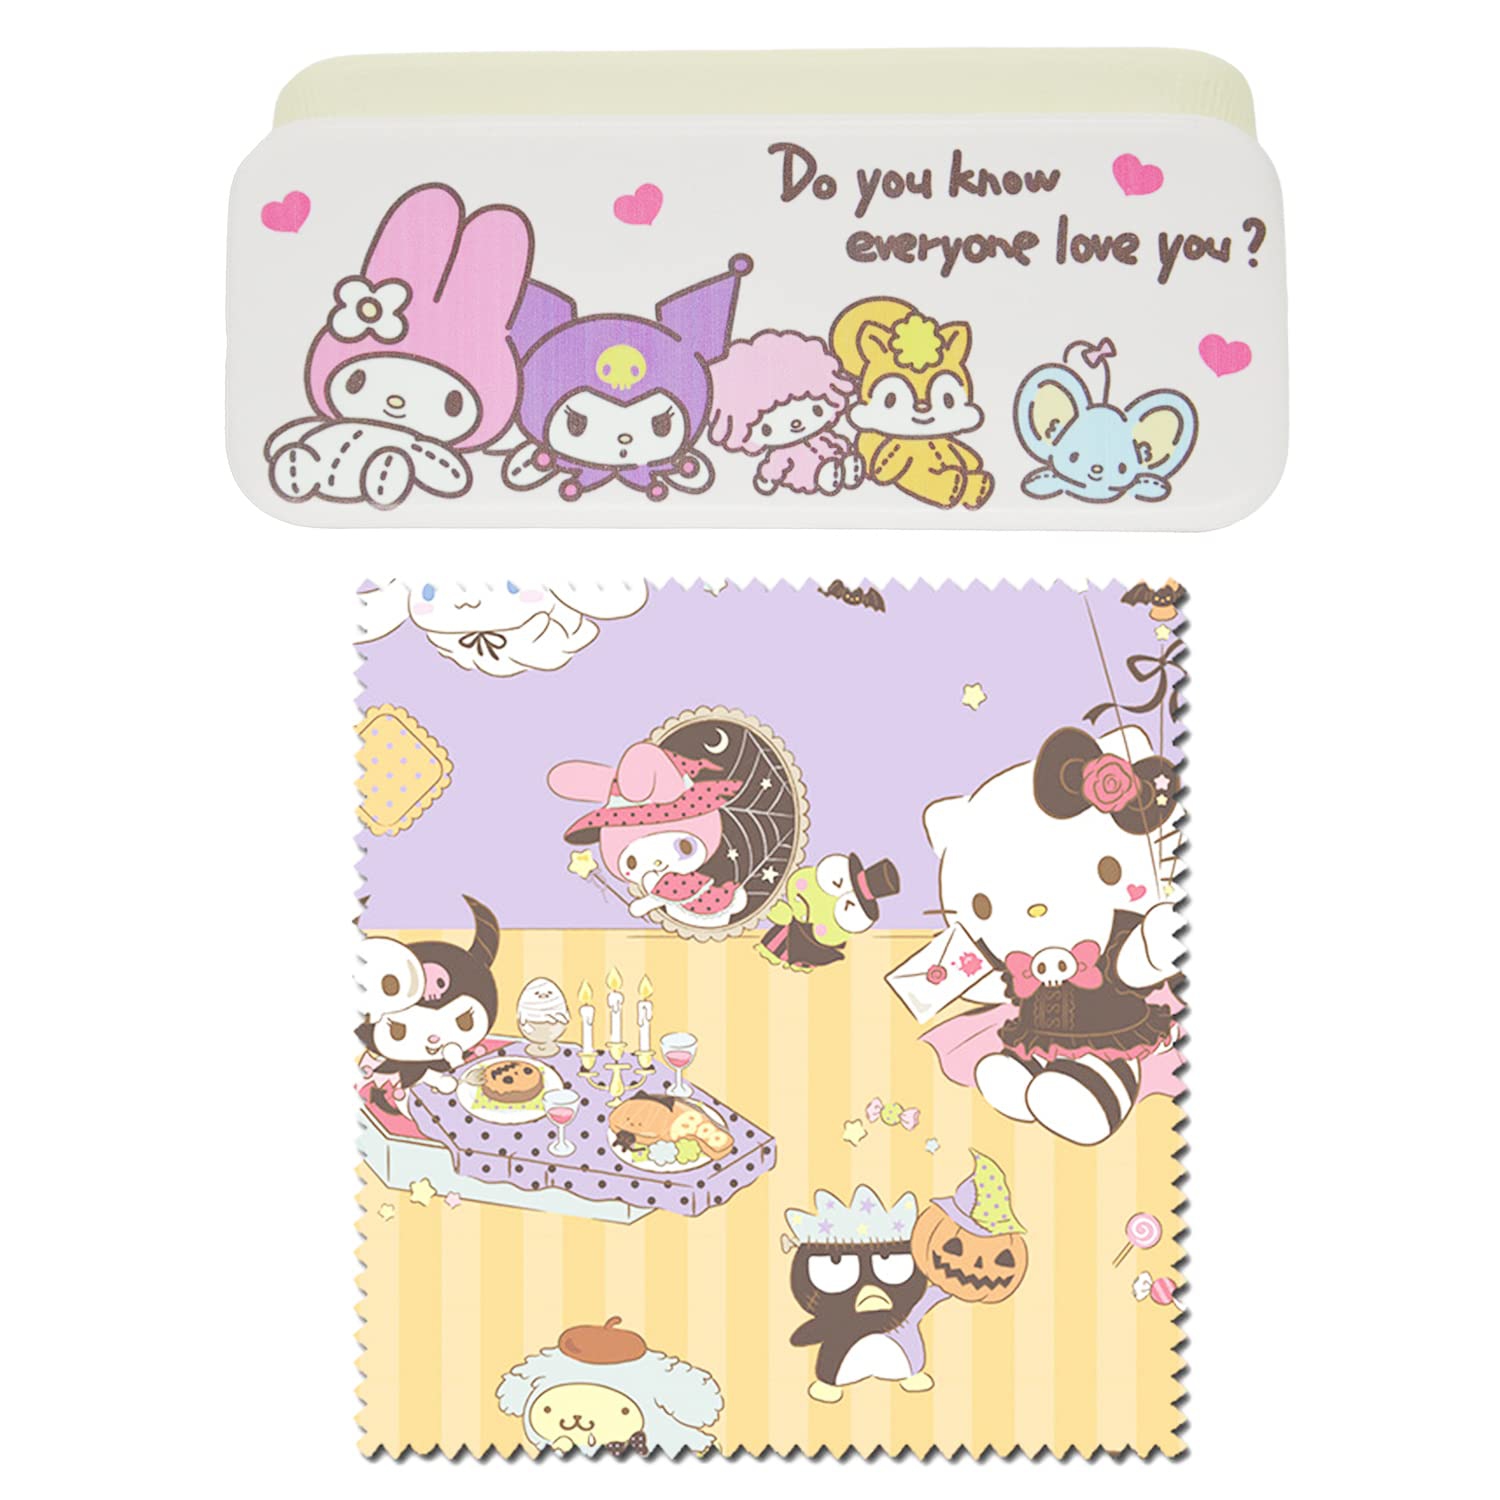 Cute Kitty Cat Hard Shell Gles Case Set with Cleaning Cloth - Portable Lens Holder Box for Women & Girls - Fits Most Gles & Sungles - Adorable & Practical!